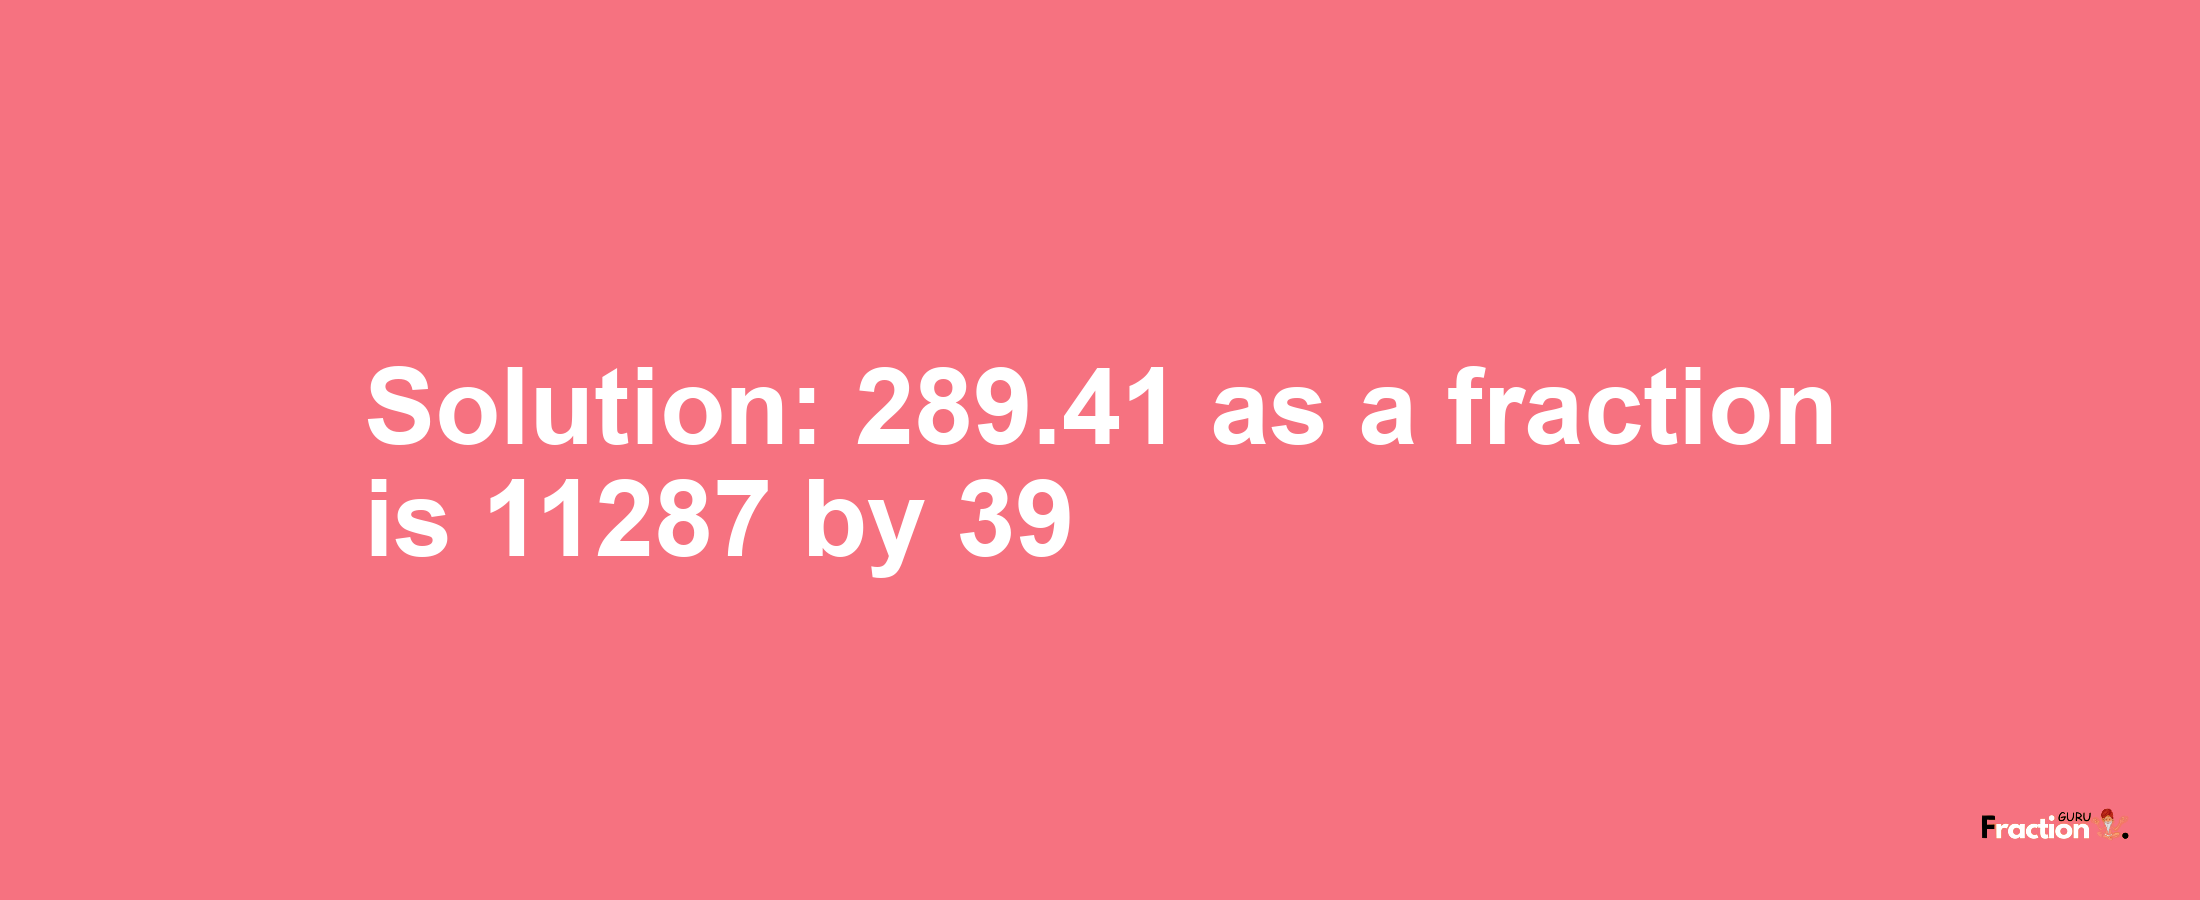 Solution:289.41 as a fraction is 11287/39